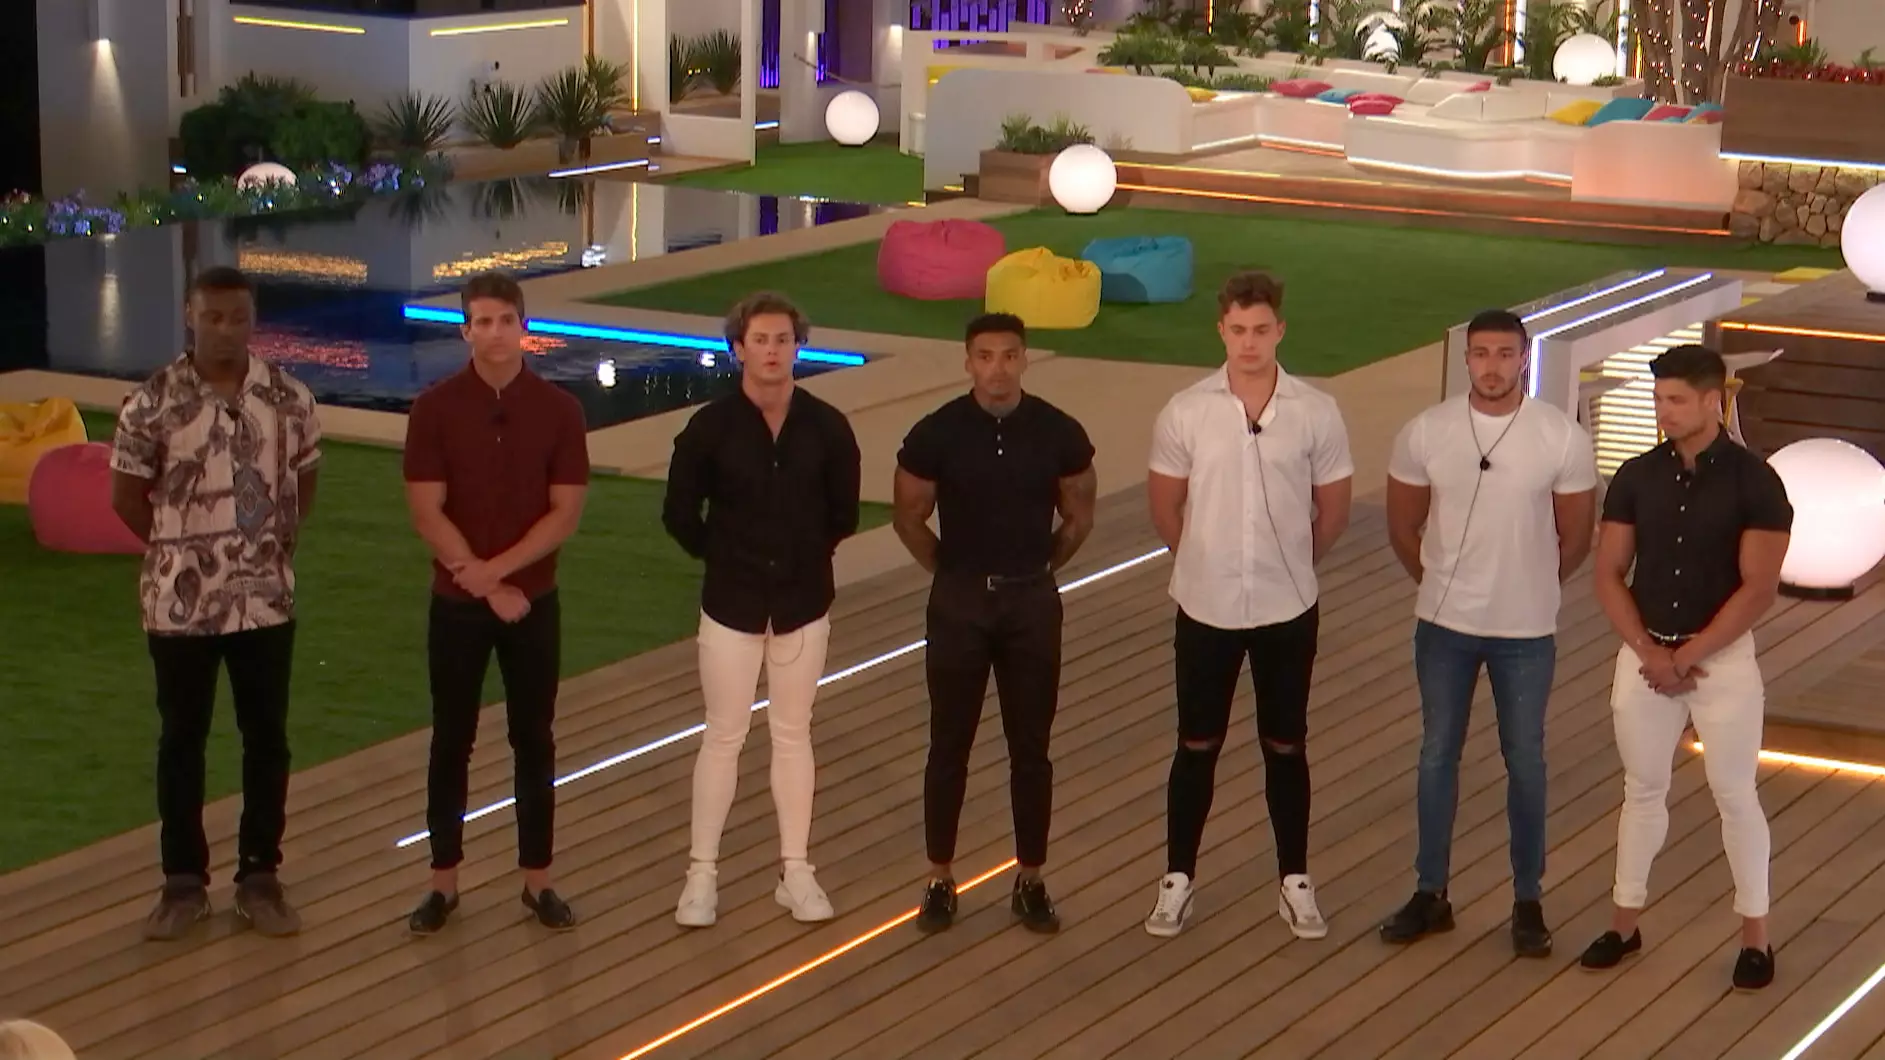 The Islanders Are Set For A Dramatic Recoupling In Tonight's 'Love Island'